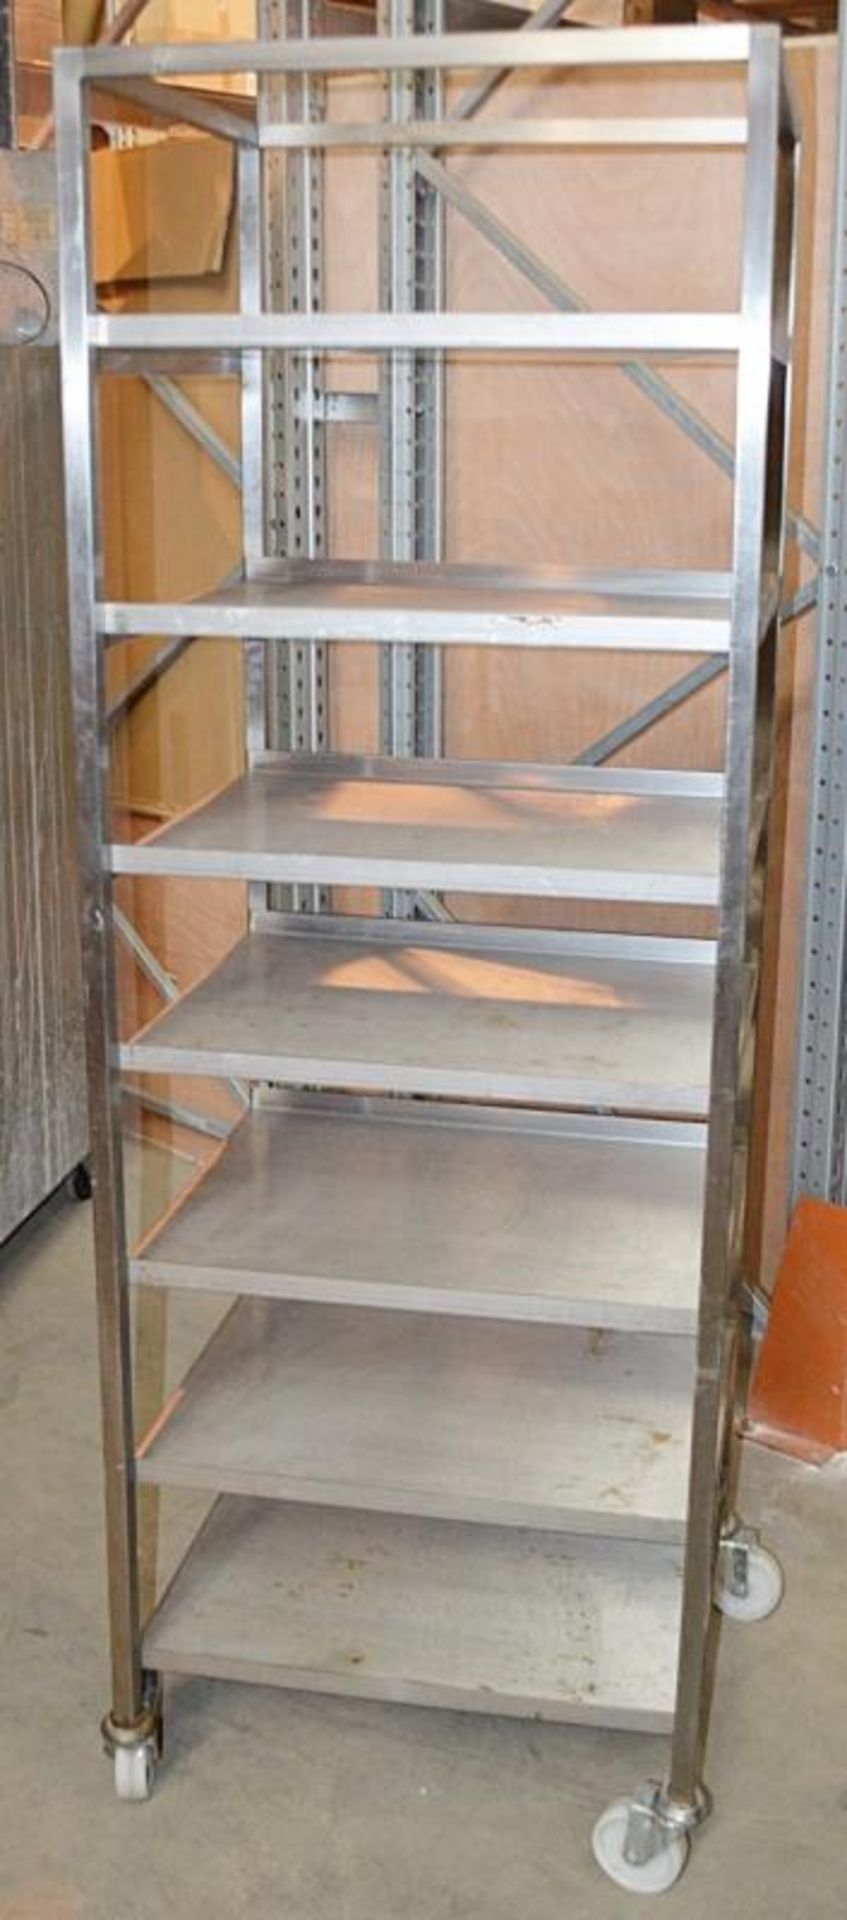 1 x Stainless Steel Commercial Kitchen 7-Teir Trolley On Castors - Dimensions: H185 x W54 x D64cm -